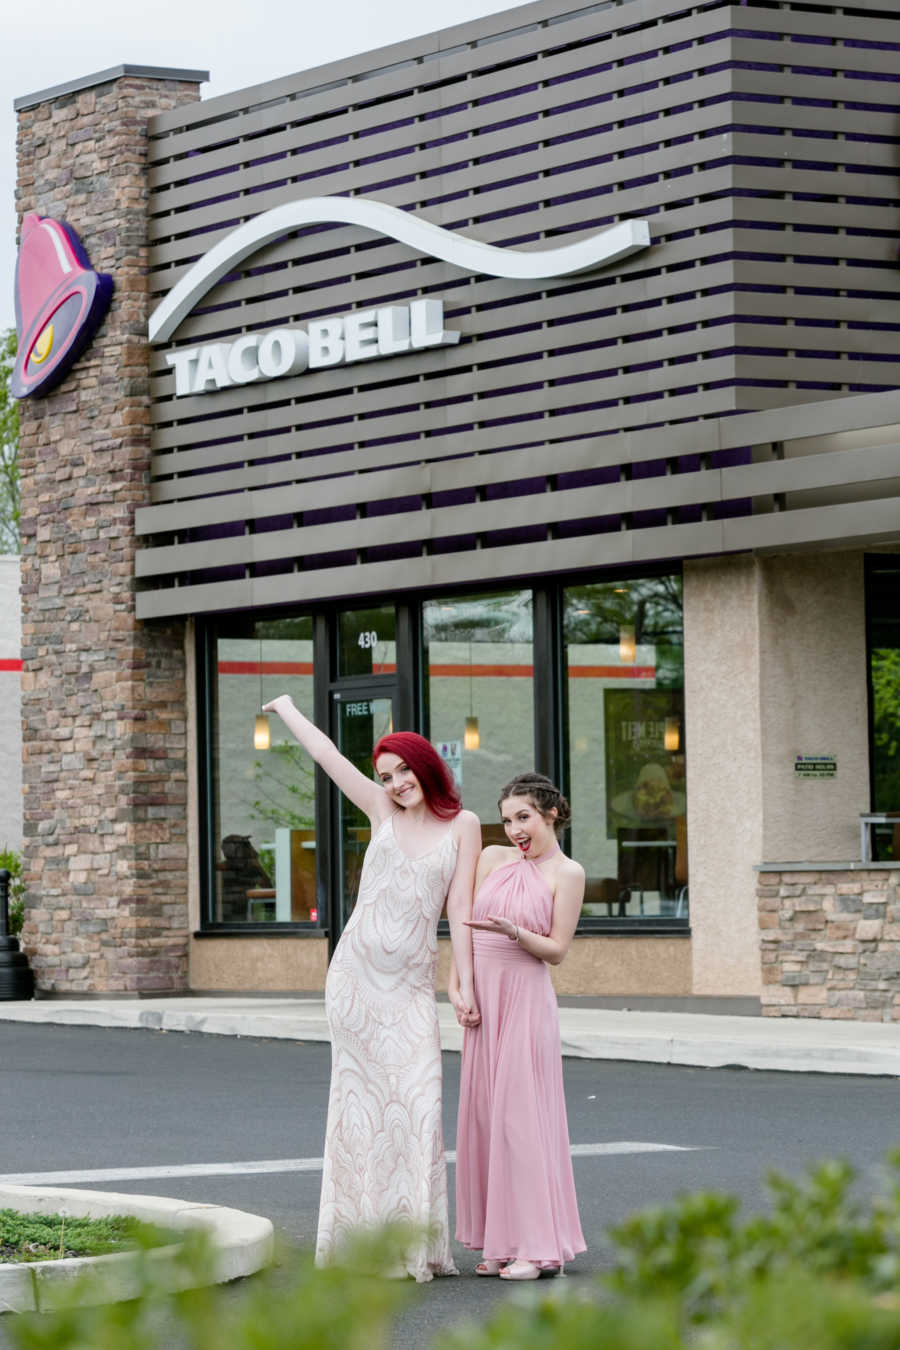 Girlfriends stand outside Taco Bell in their prom dresses